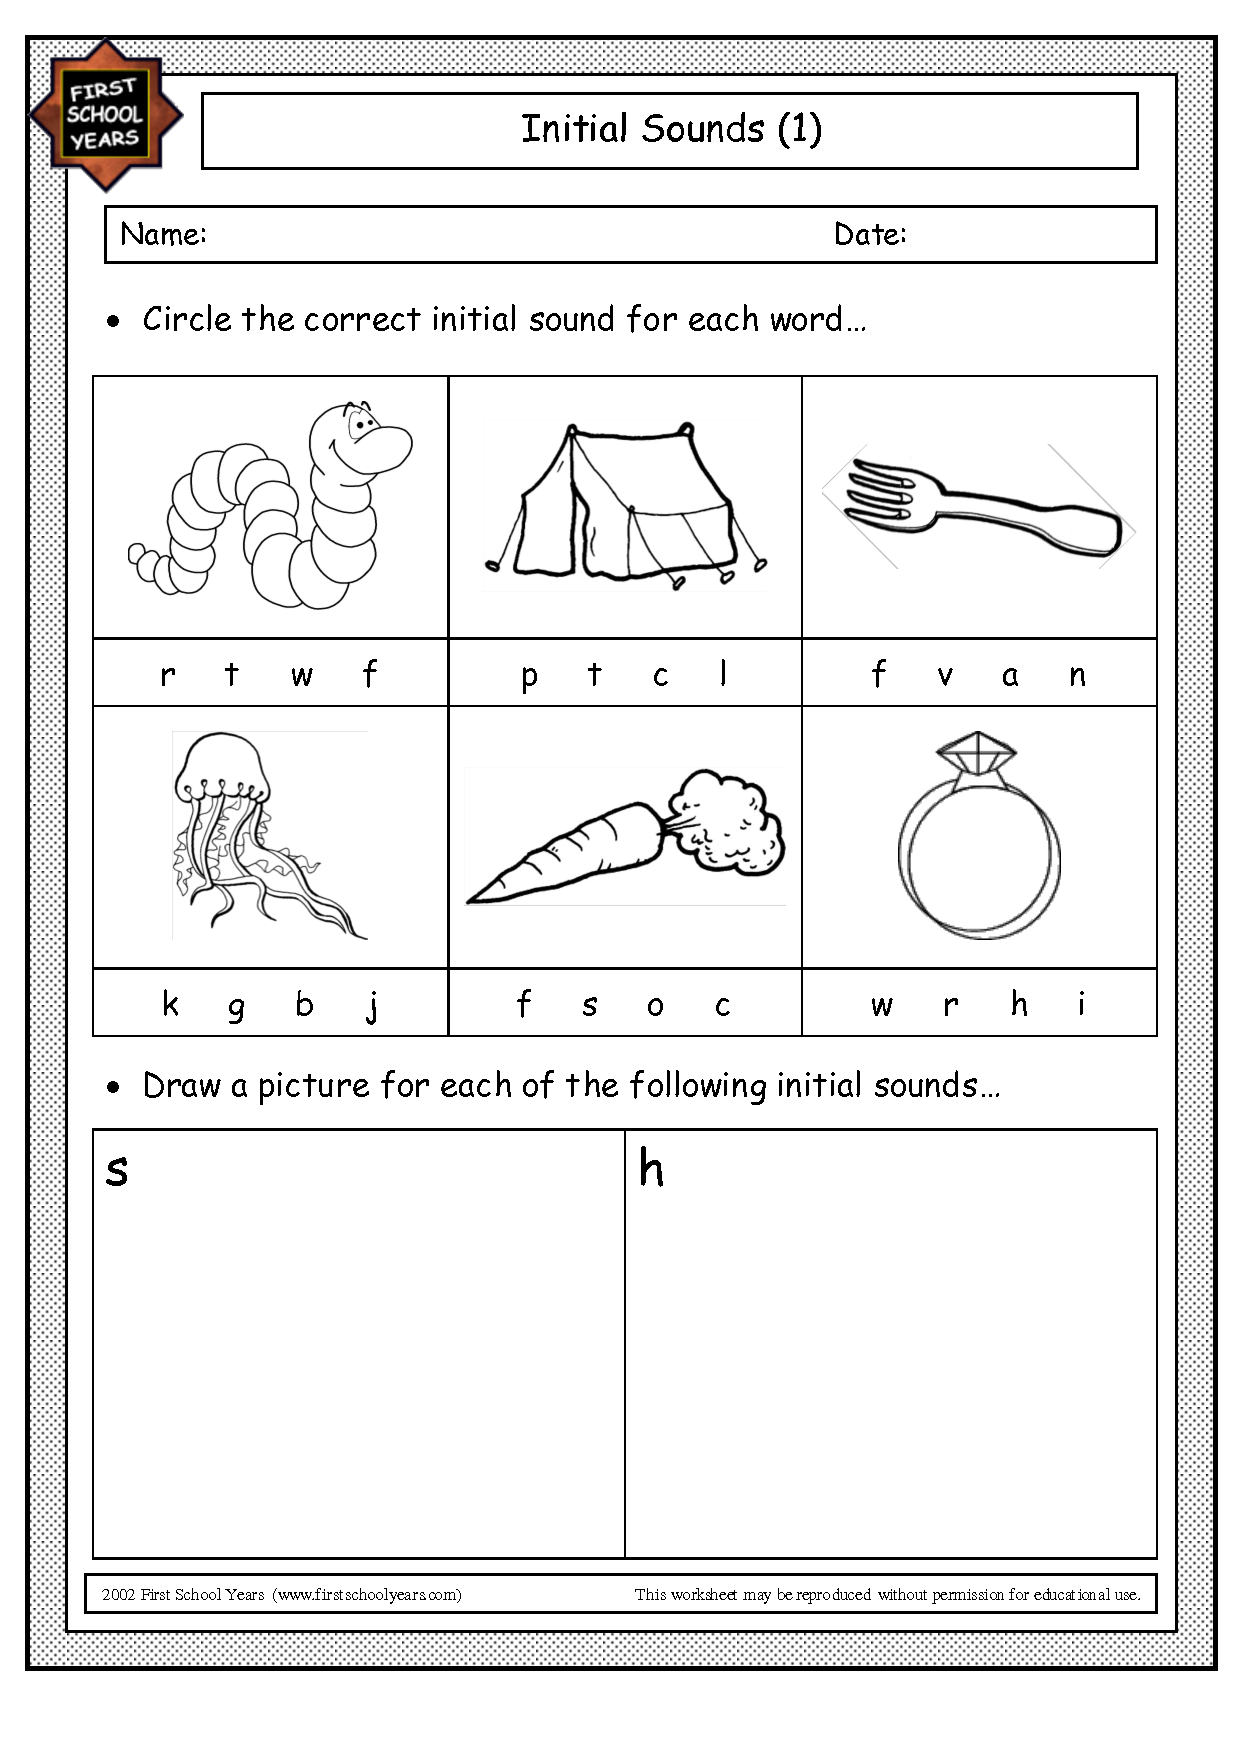 15 Best Images of CH Phonics Worksheets - Free Sh CH Th Digraph